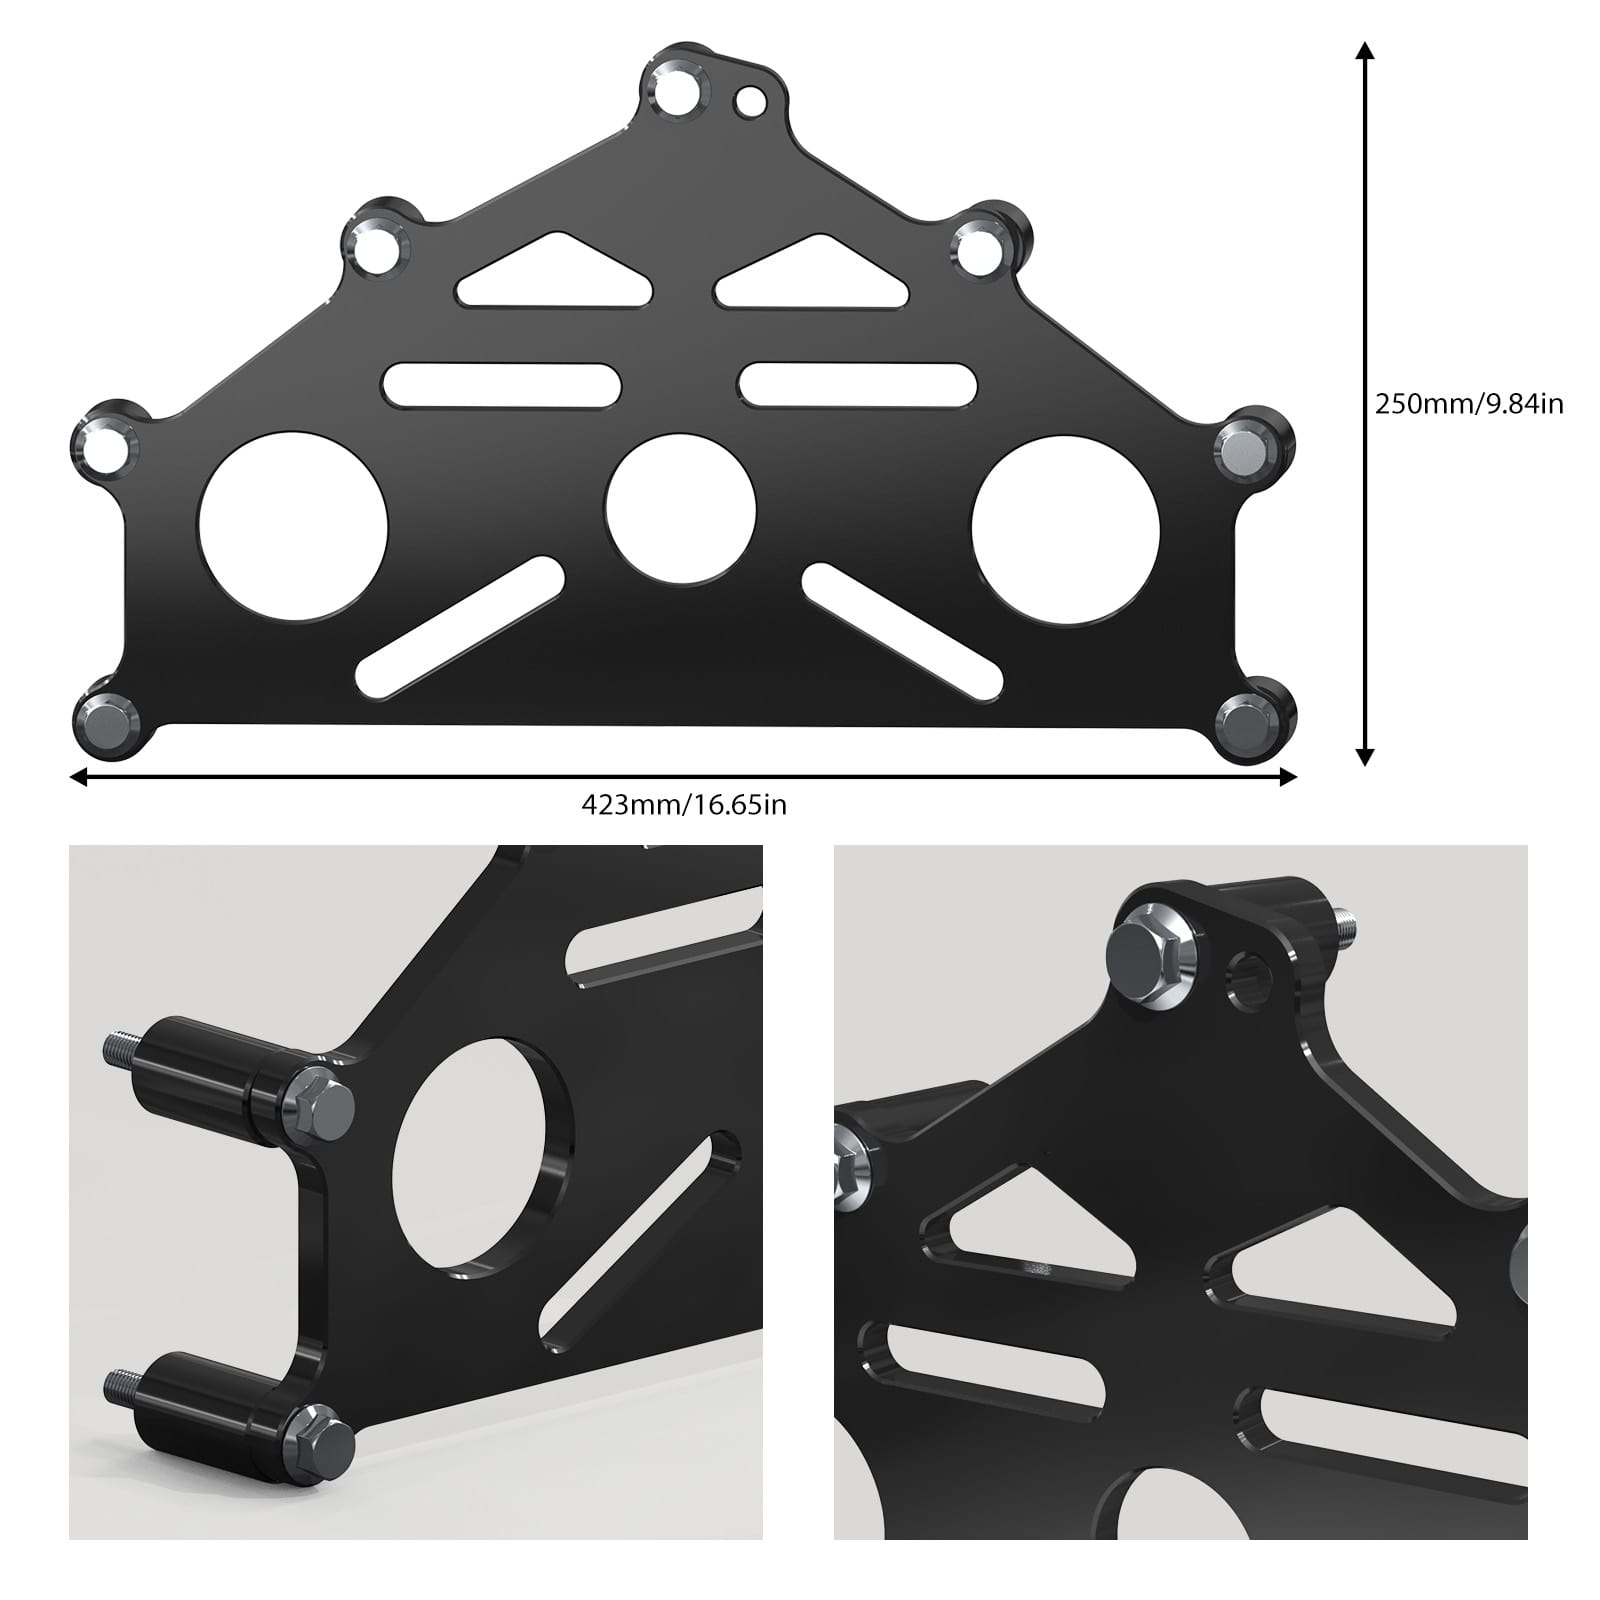 BEVINSEE LS Engines Heavy-Duty Engine Stand Support Adapter Plate Bracket For Chevy SBC BBC LS LT Engine